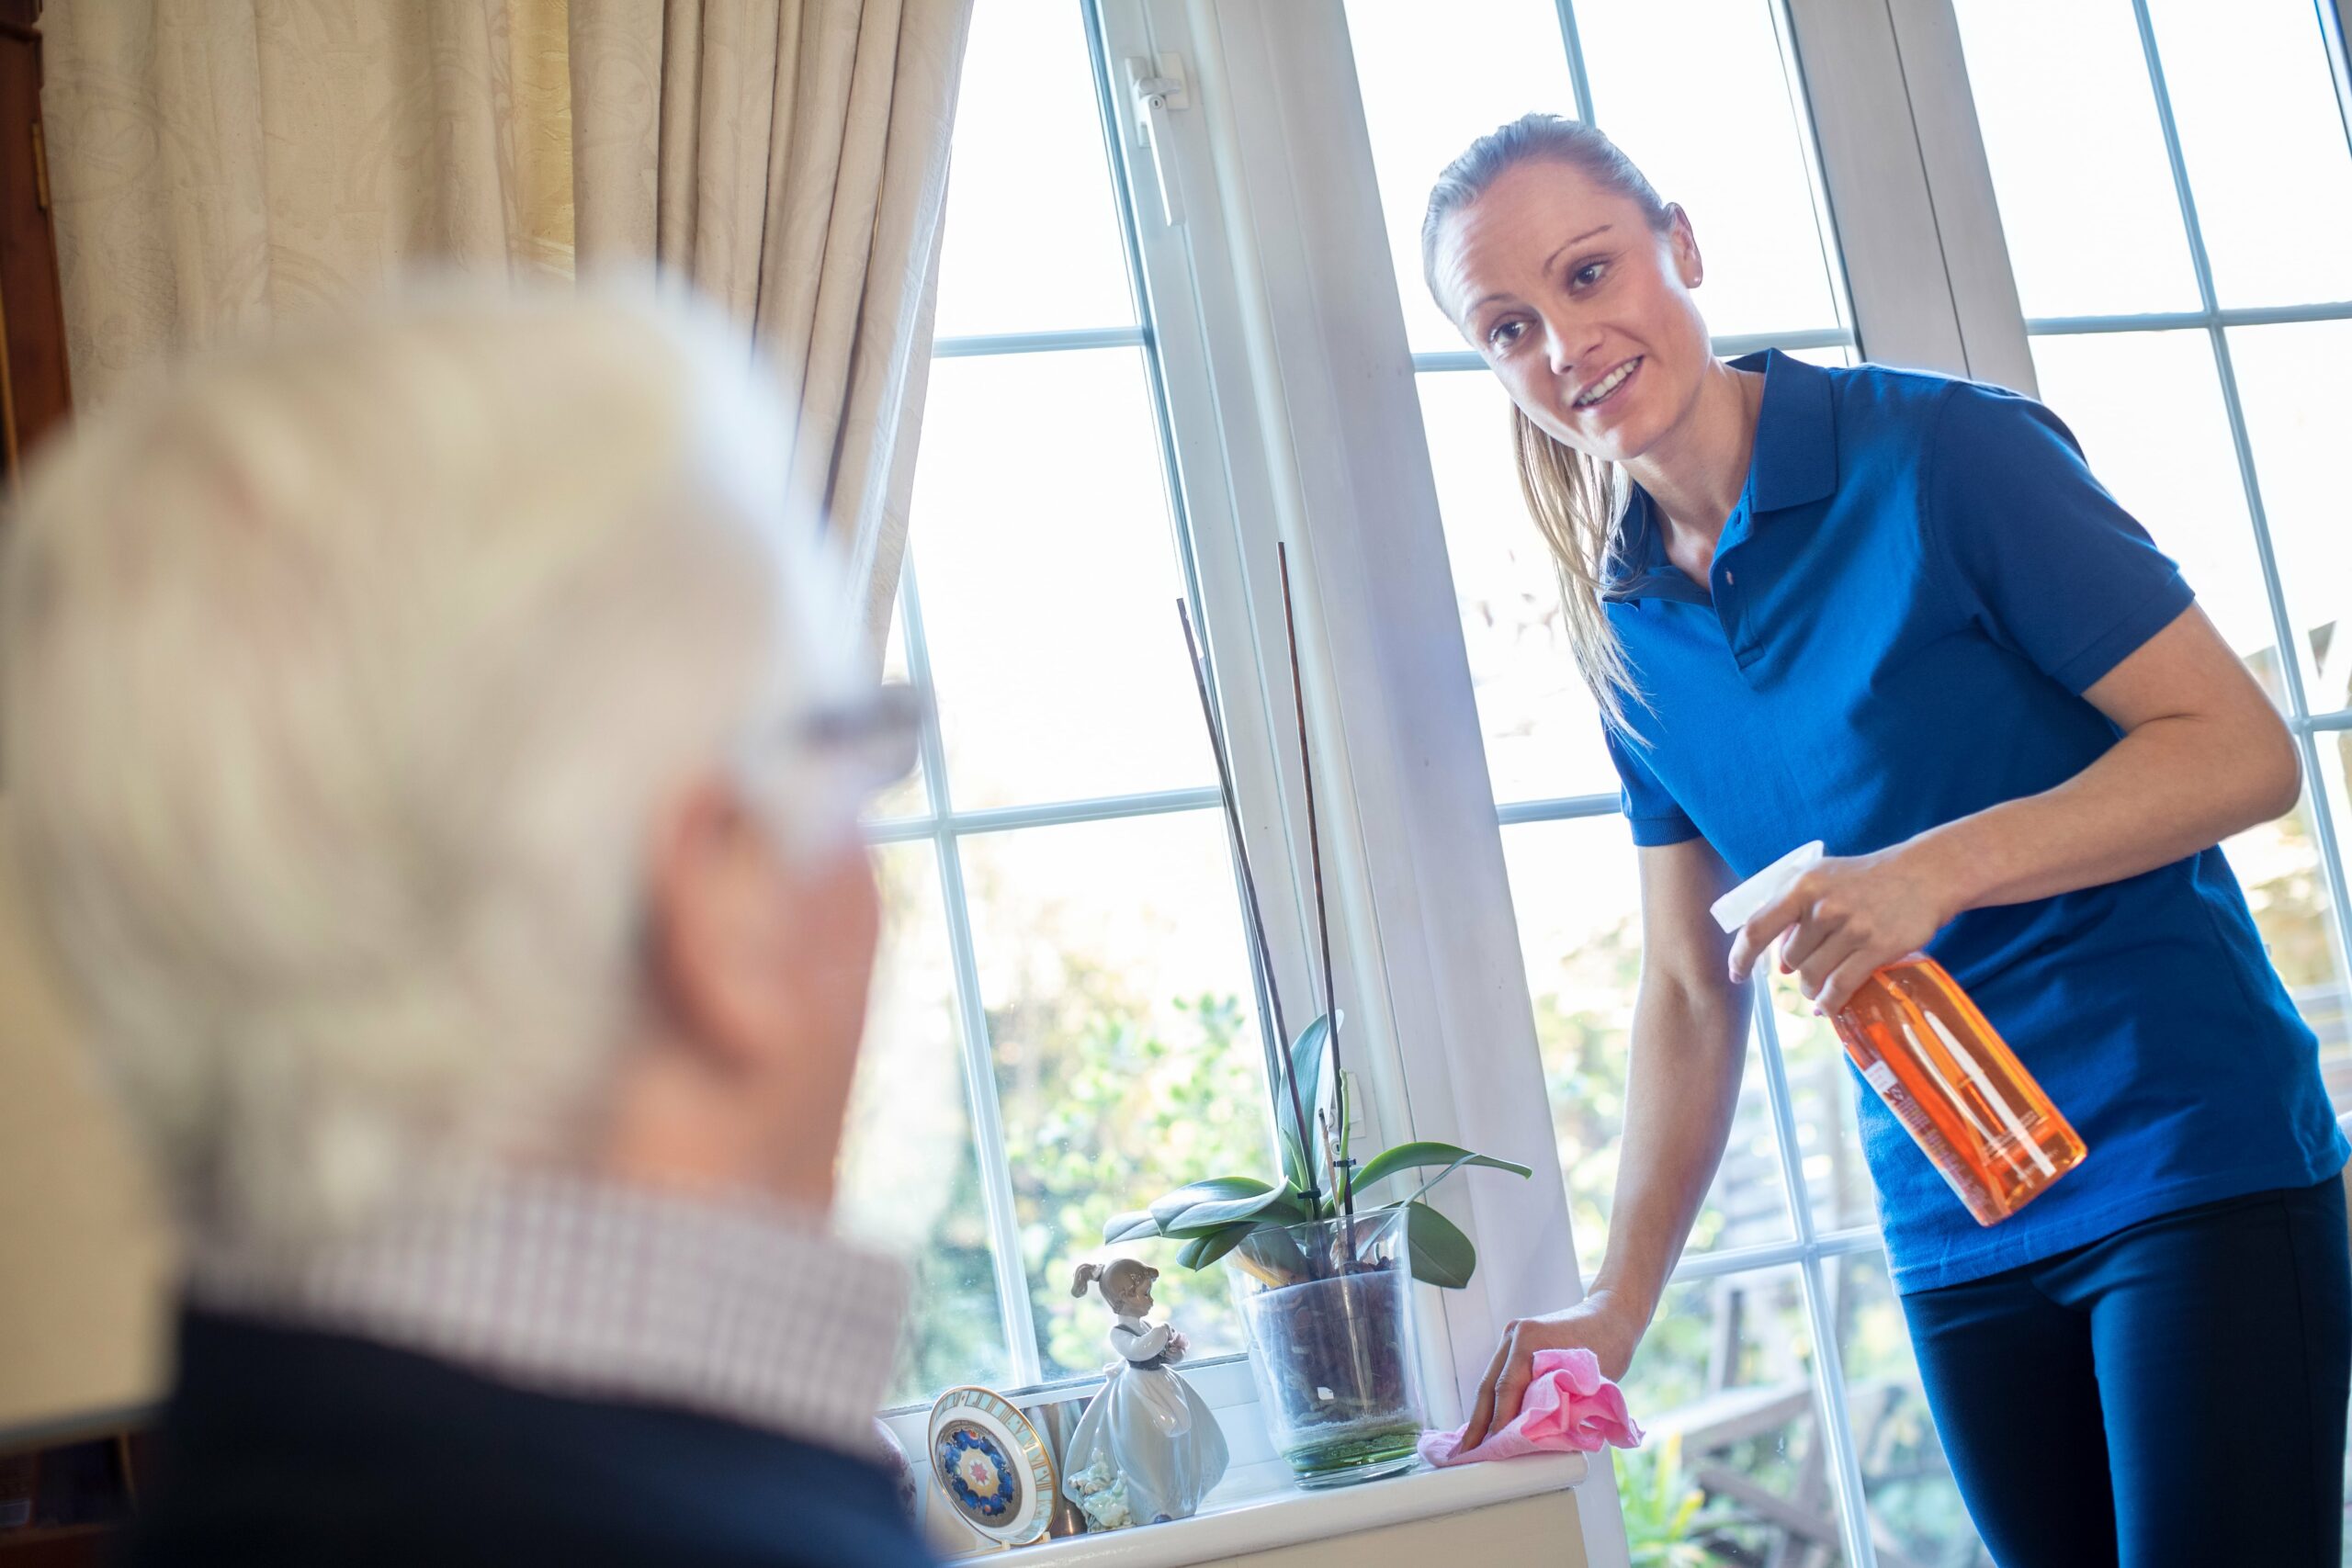 Caring Companion Cleaning For Senior